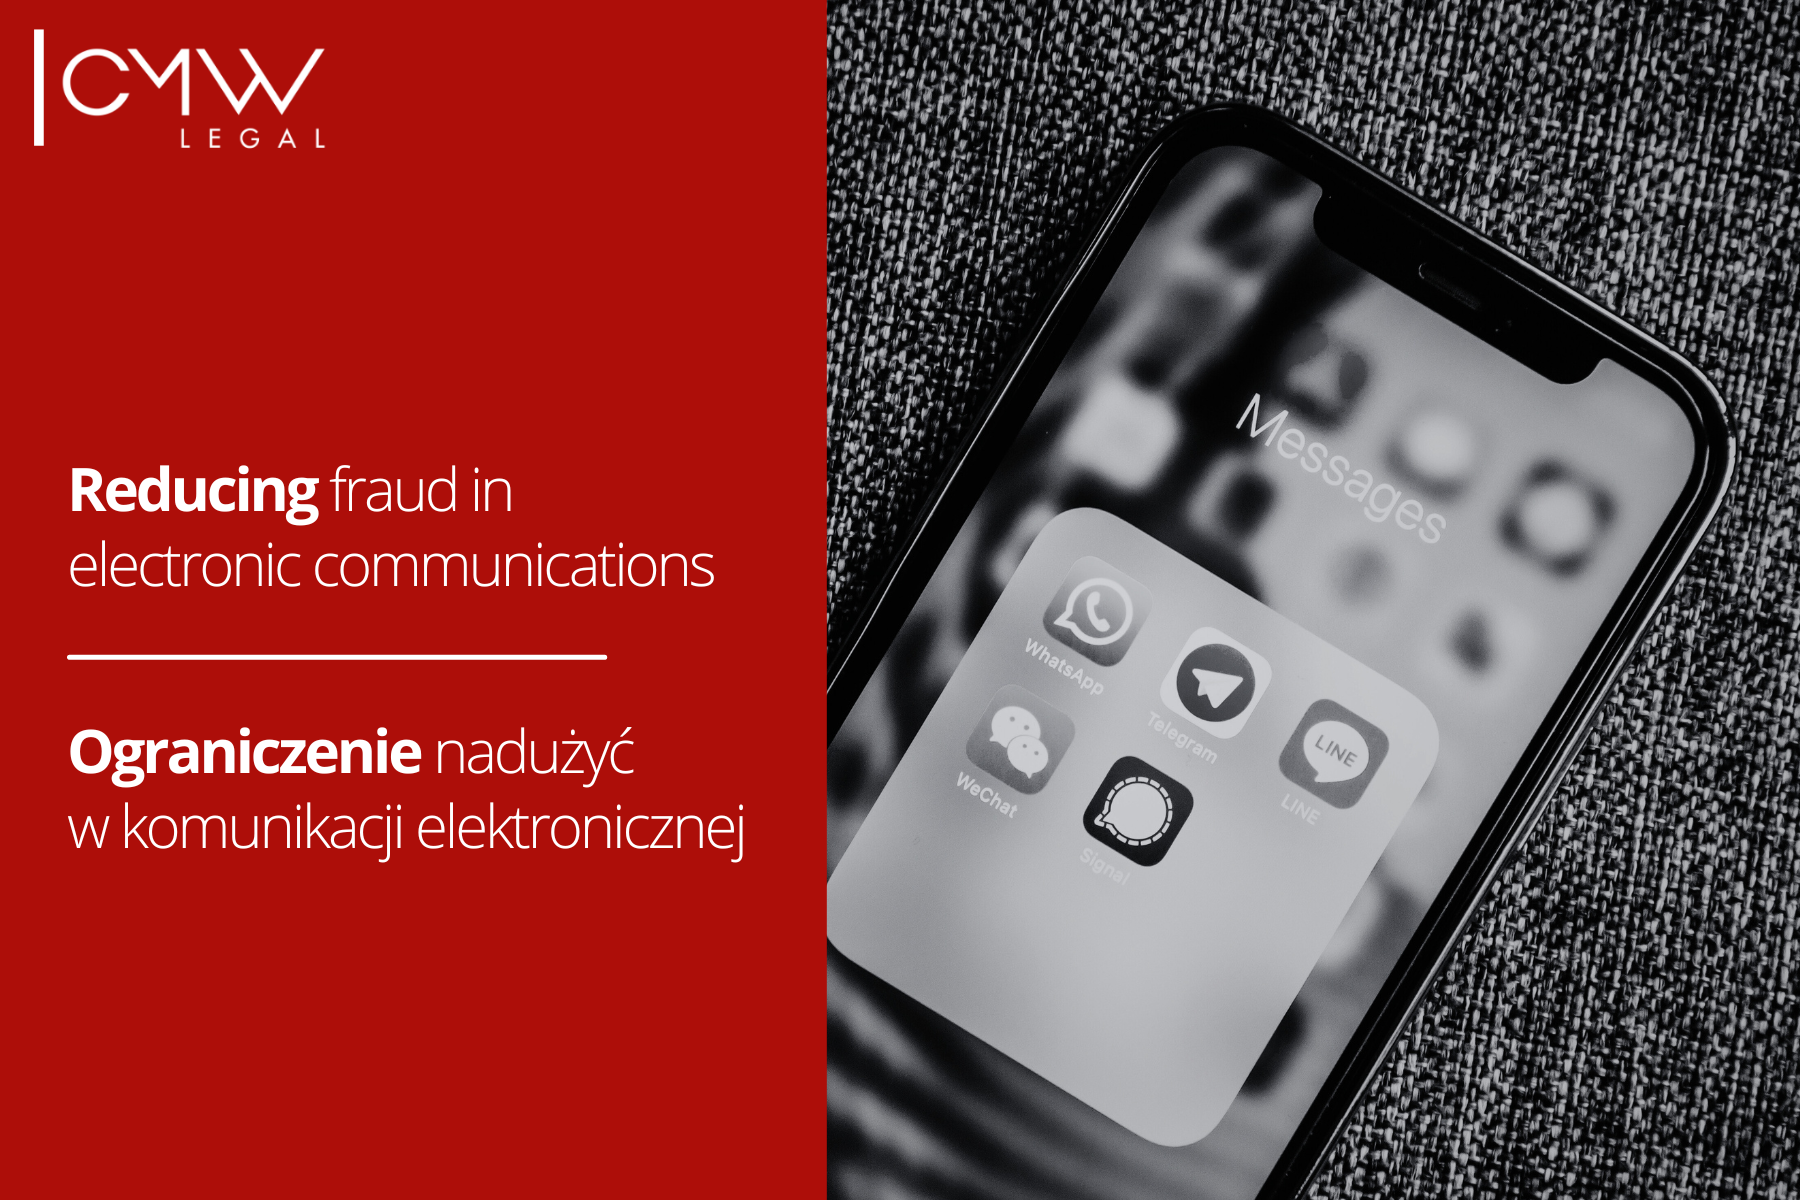  Entry into force of the law on combating fraud in electronic communications